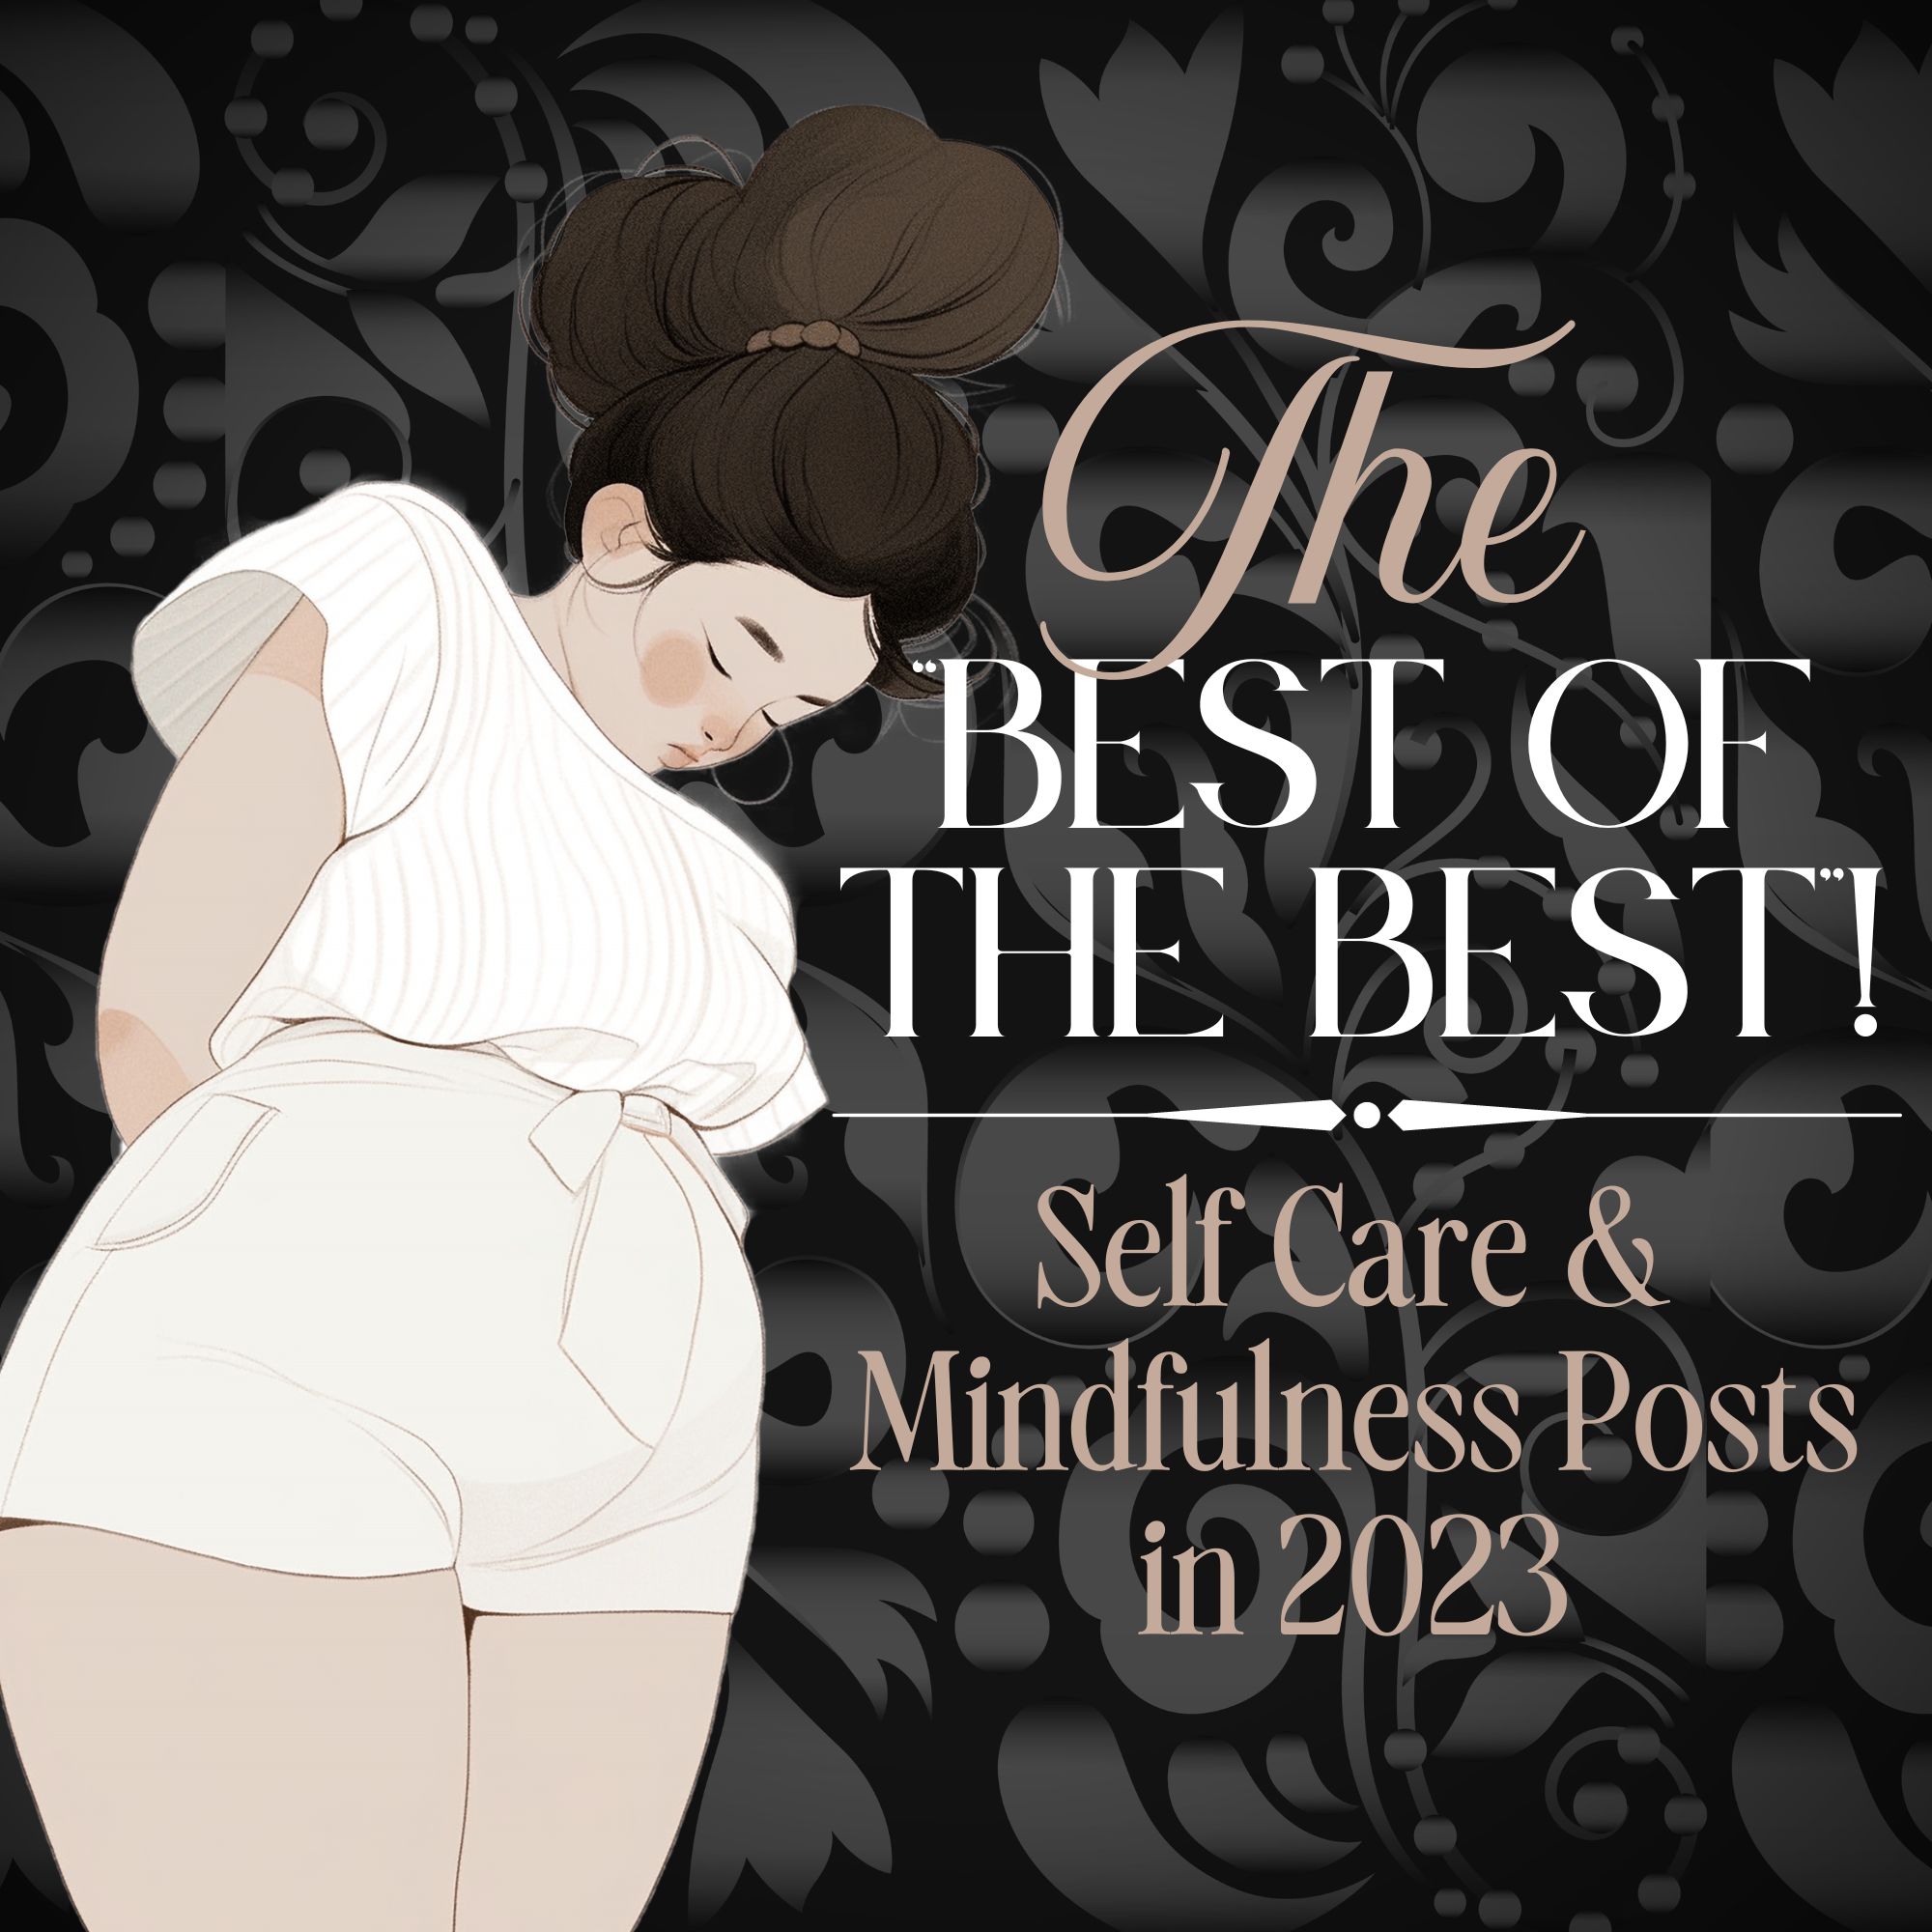 “The Best of the Best” Self Care & Mindfulness Posts in 2023